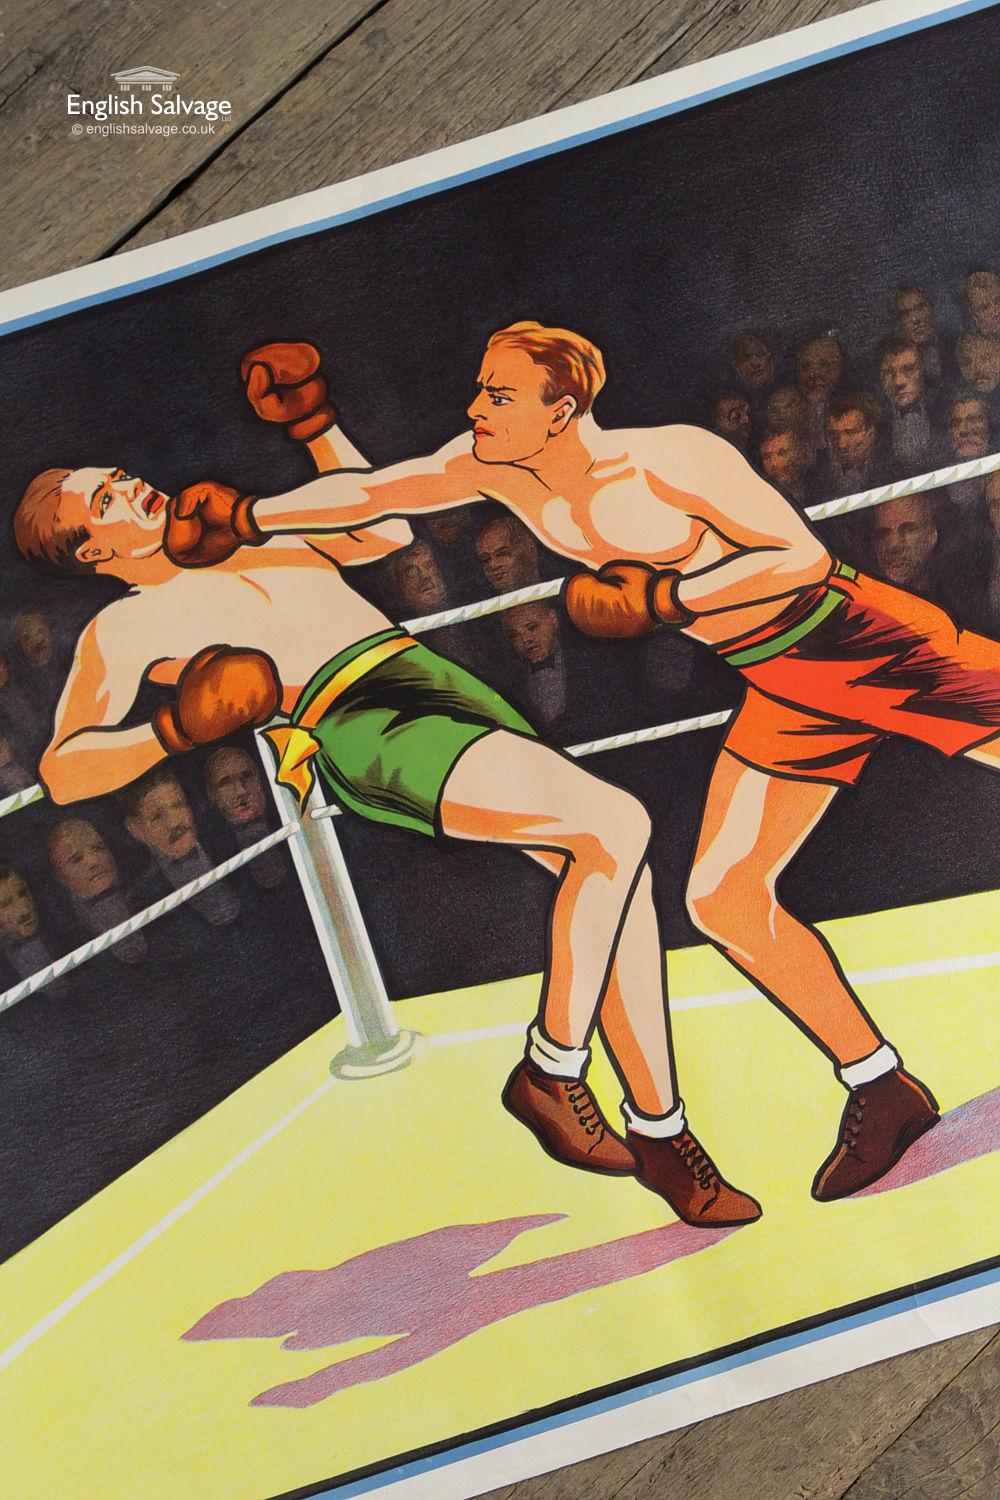 Reclaimed large brightly colored vintage boxing match print, printed by Willsons' Leicester. Framed and mounted on a wall this would make a great display piece. Similar style prints available - see last image.